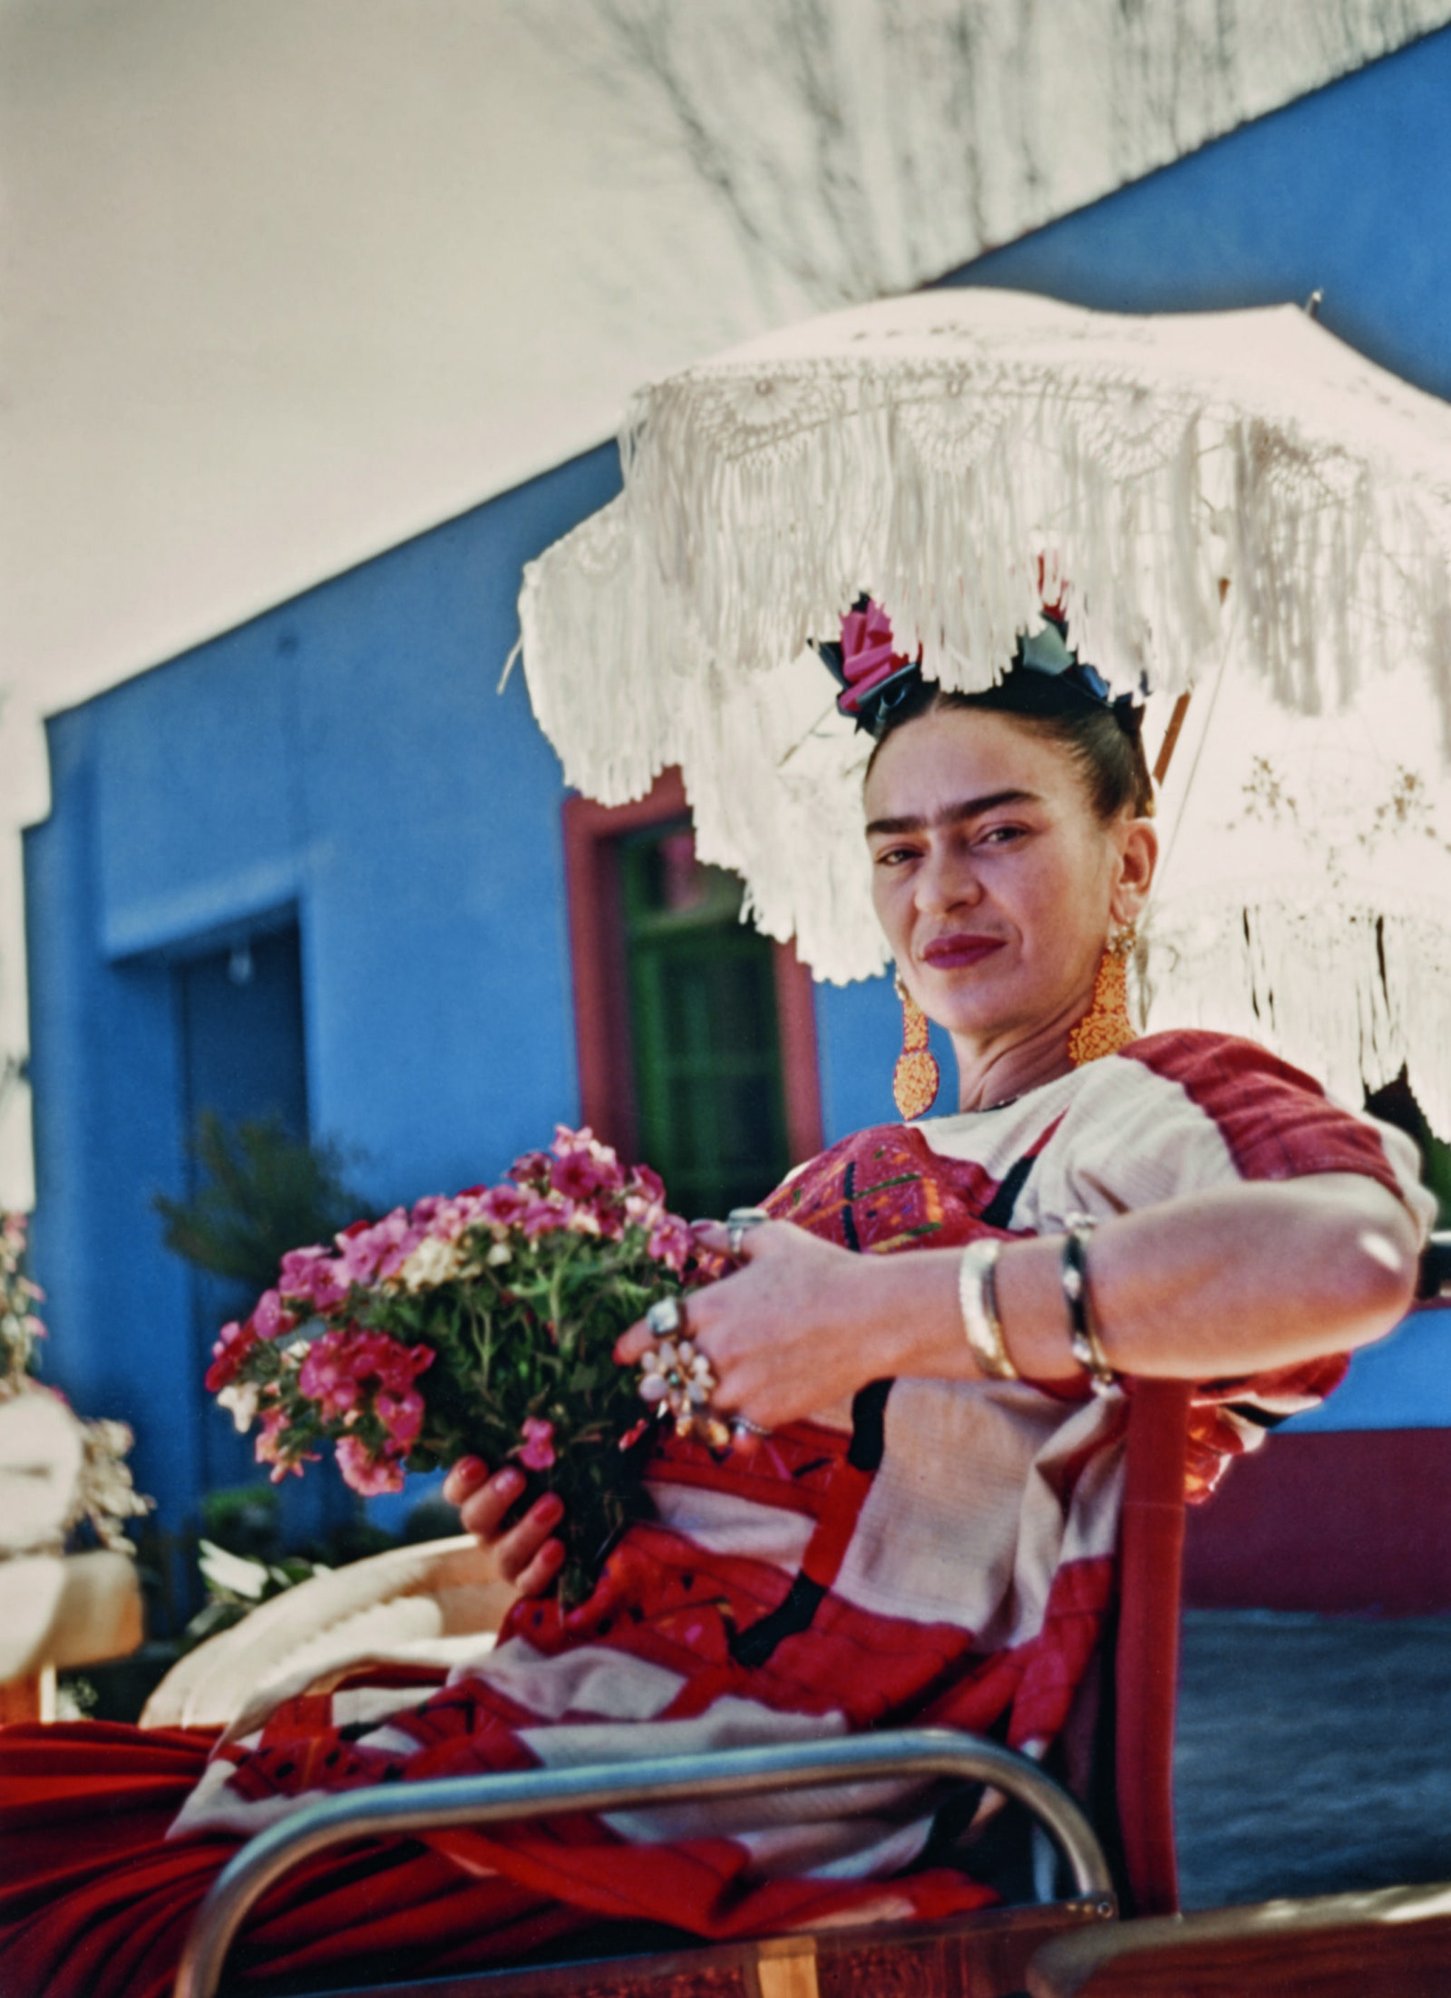 Frida Khalo at her house in Coyoacan, now is a museum